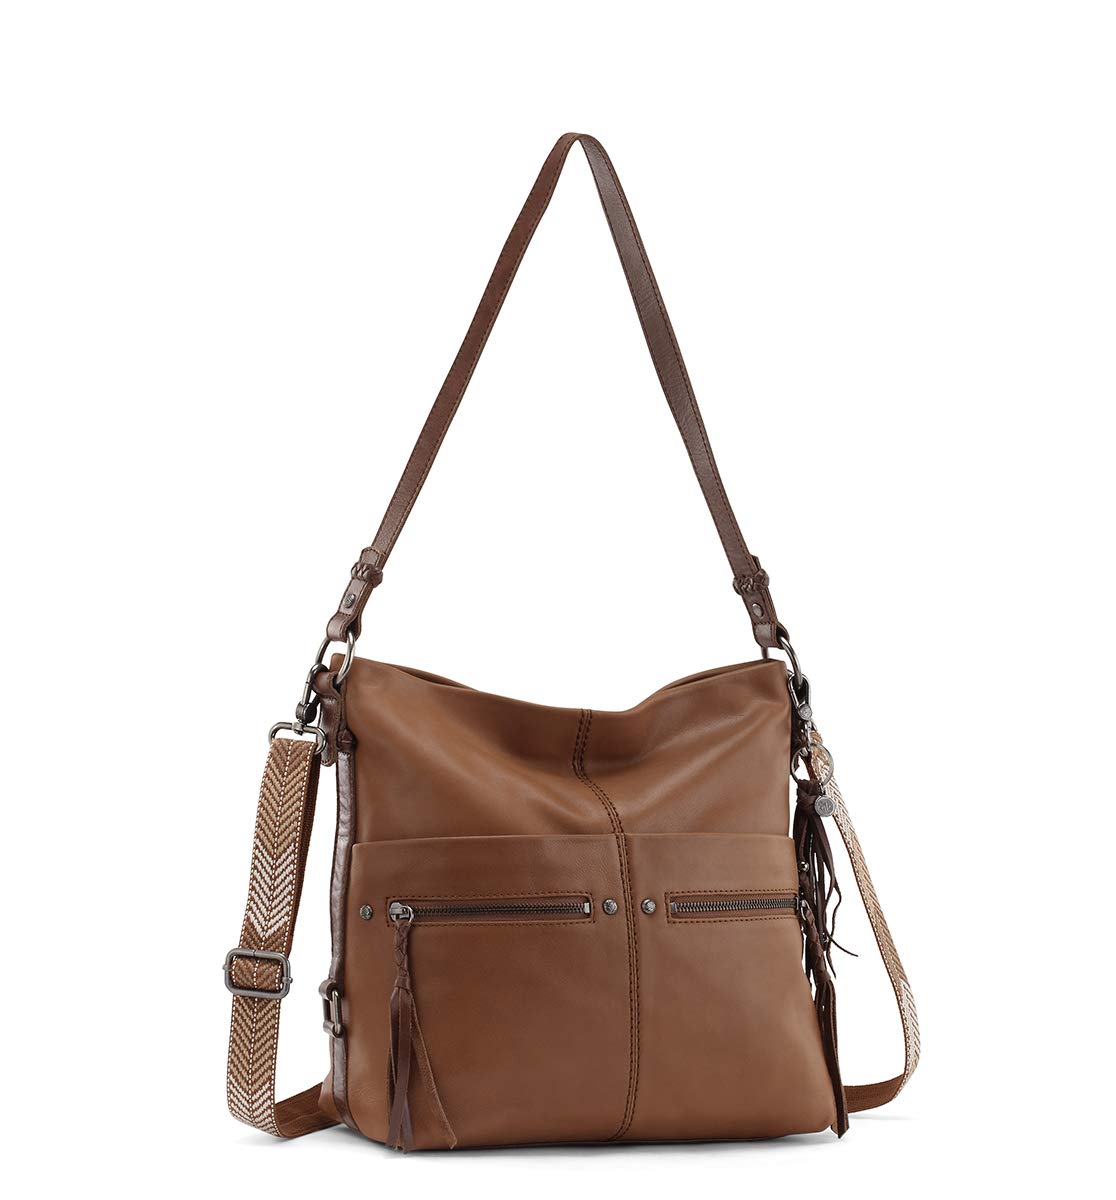 The Sak Ashland Bucket Bag in Leather, Casual Everyday Purse with Removable Crossbody Strap, Handcrafted & Sustainably-Made